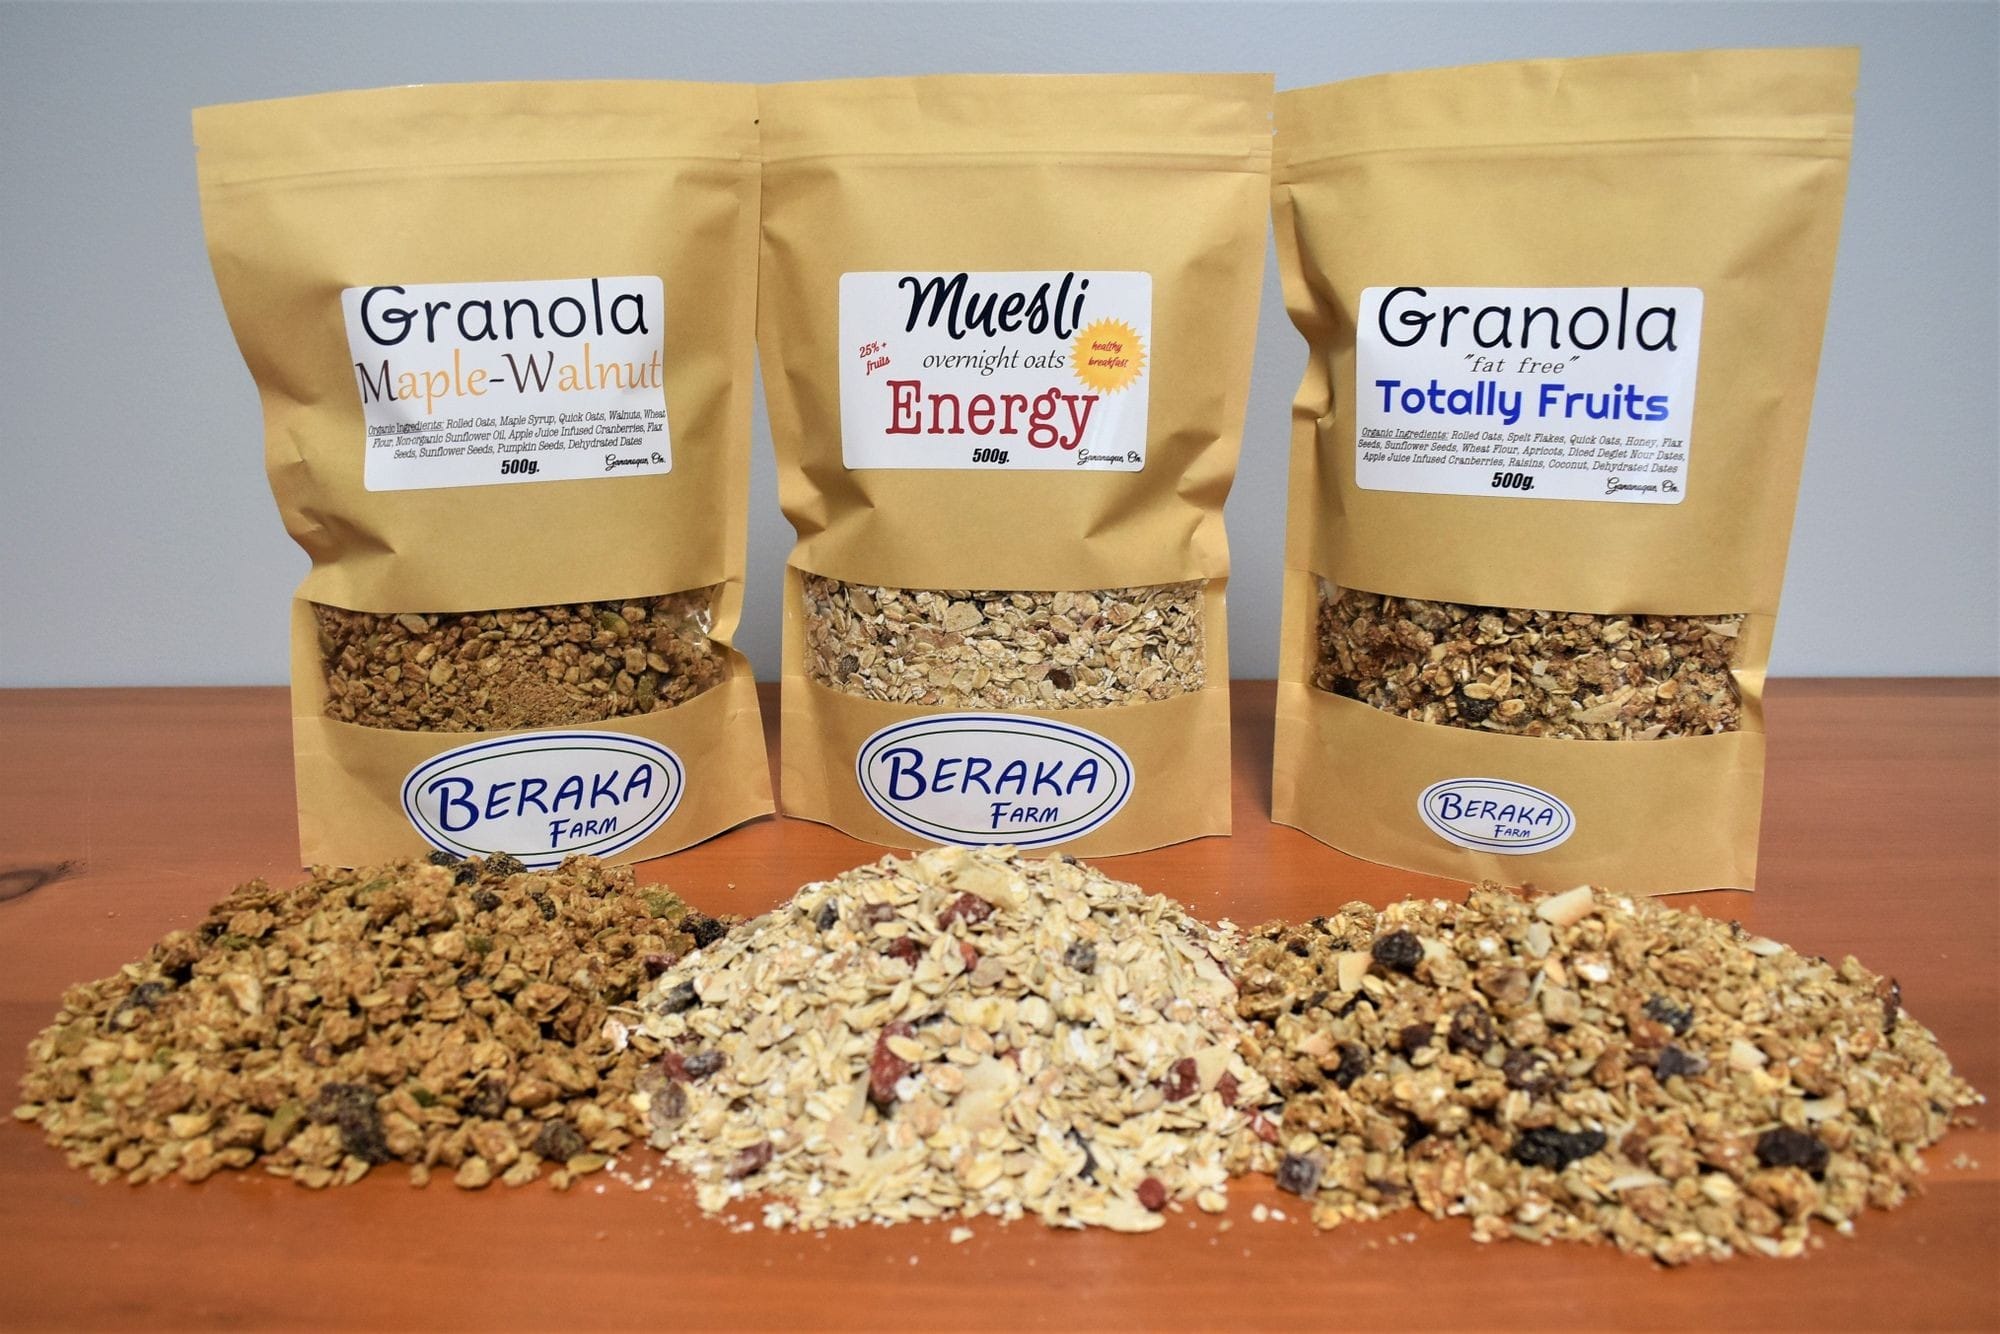 Granola and Muesli made with organic ingredients